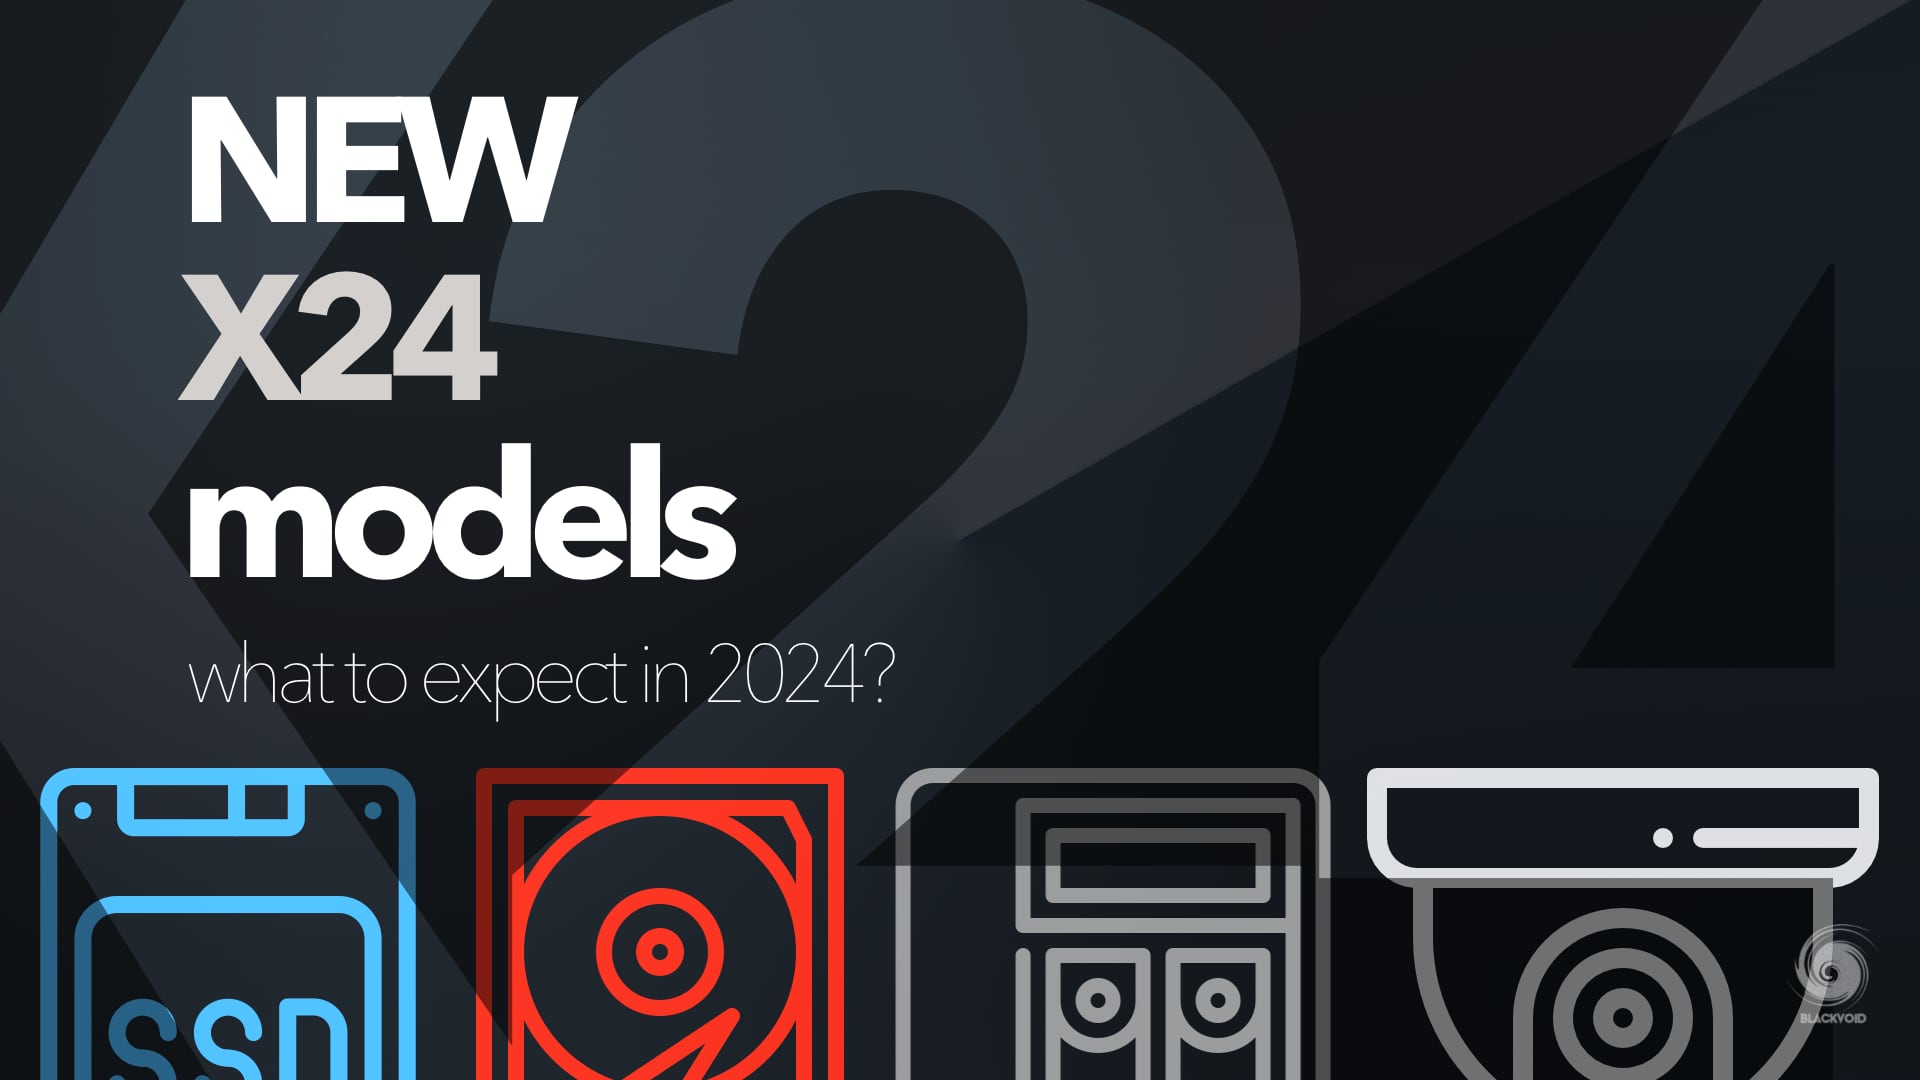 NEW x24 Synology model lineup